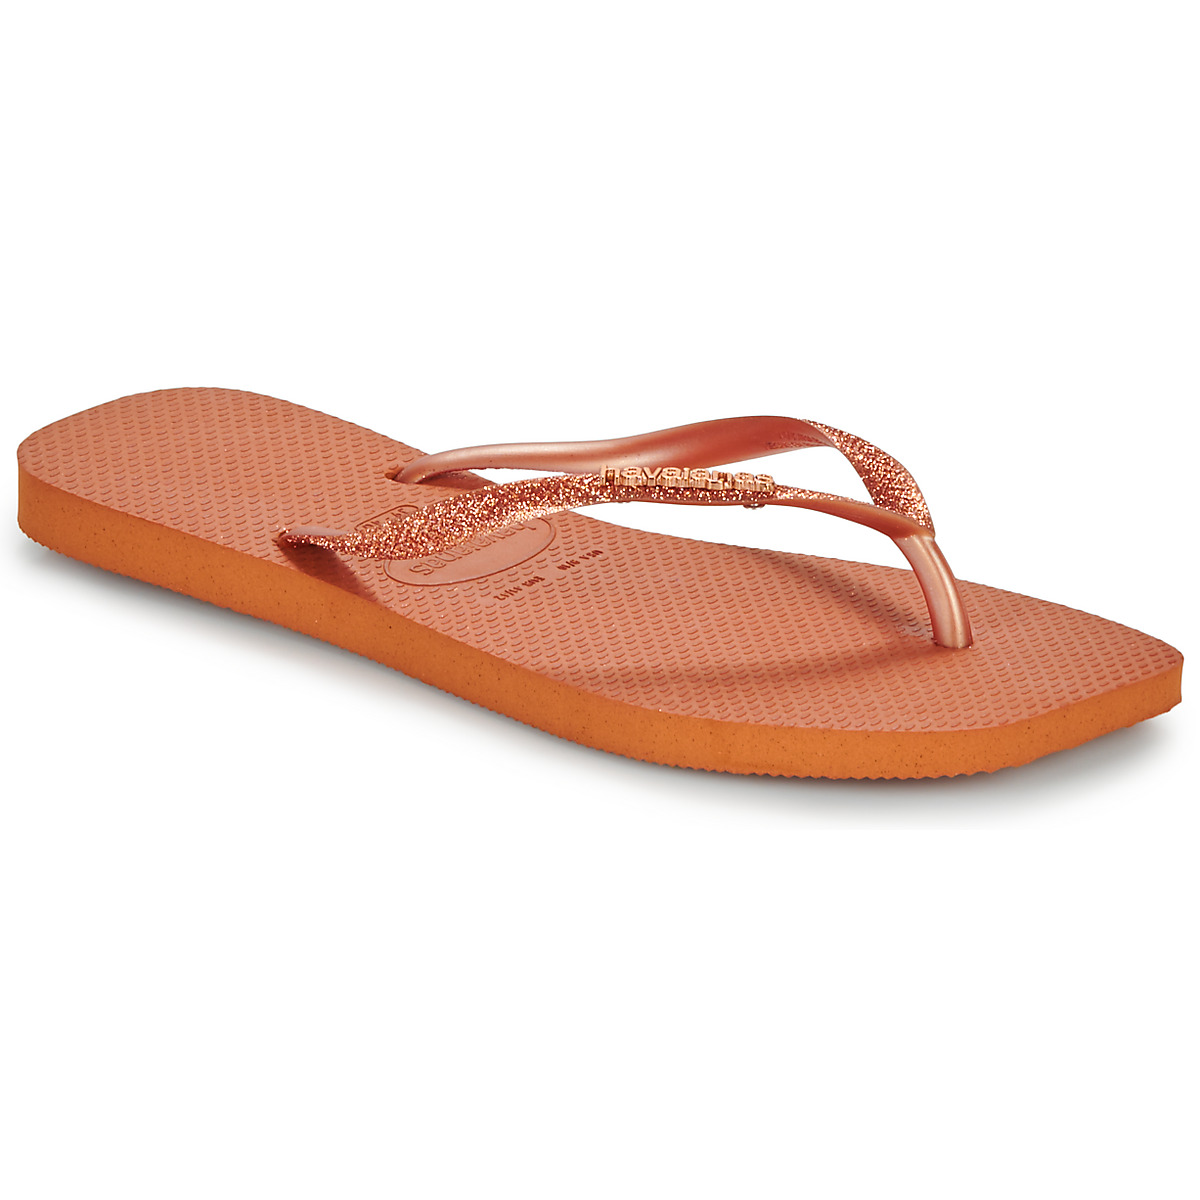 Chaussures Femme Tongs Havaianas SLIM SQUARE GLITTER 